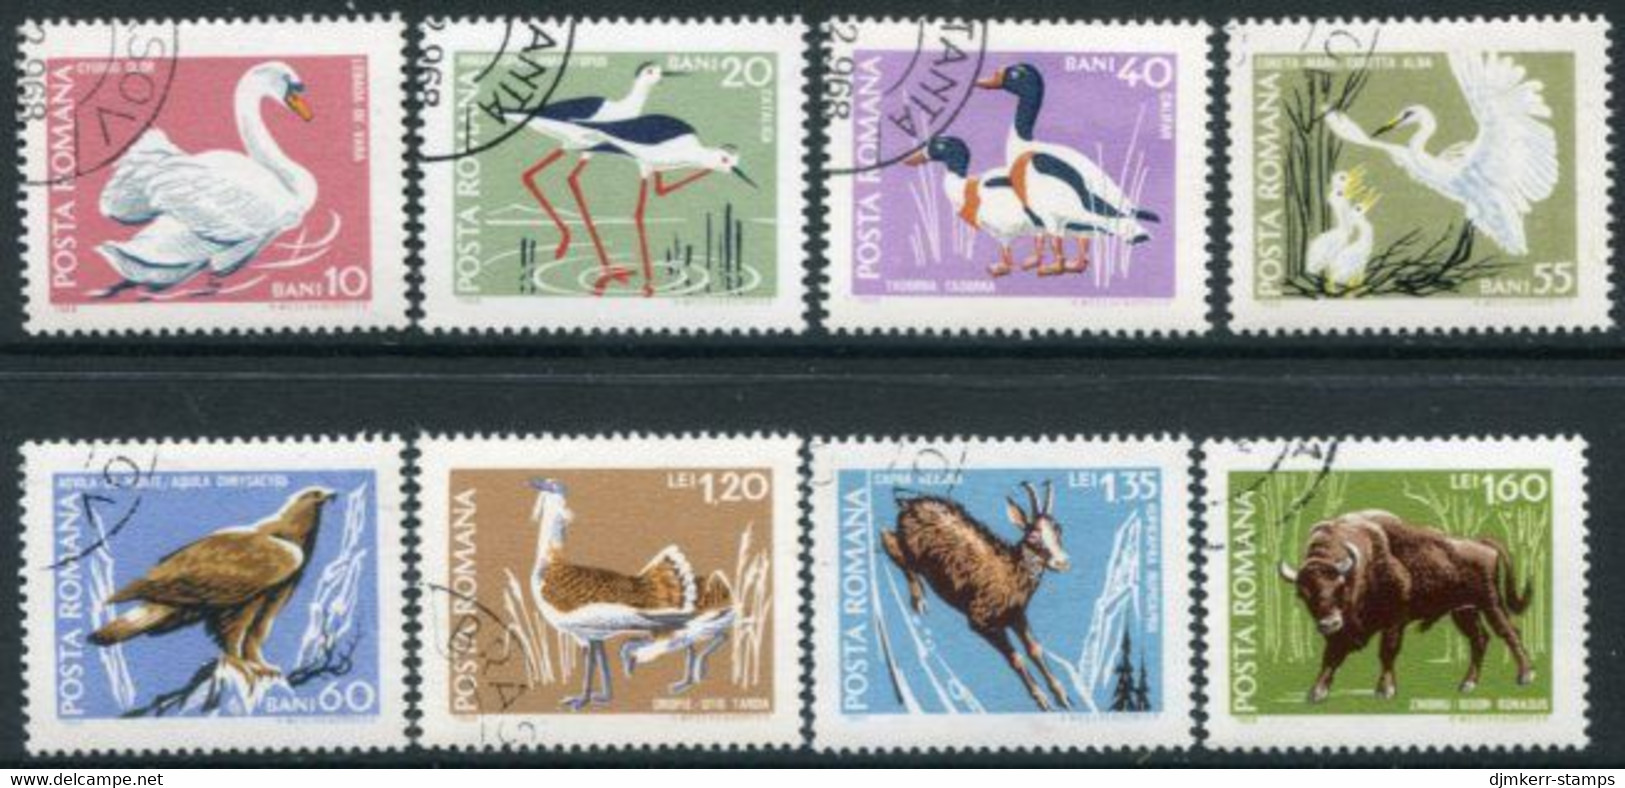 ROMANIA 1968 Protected Fauna  Used  Michel 2724-31 - Oblitérés